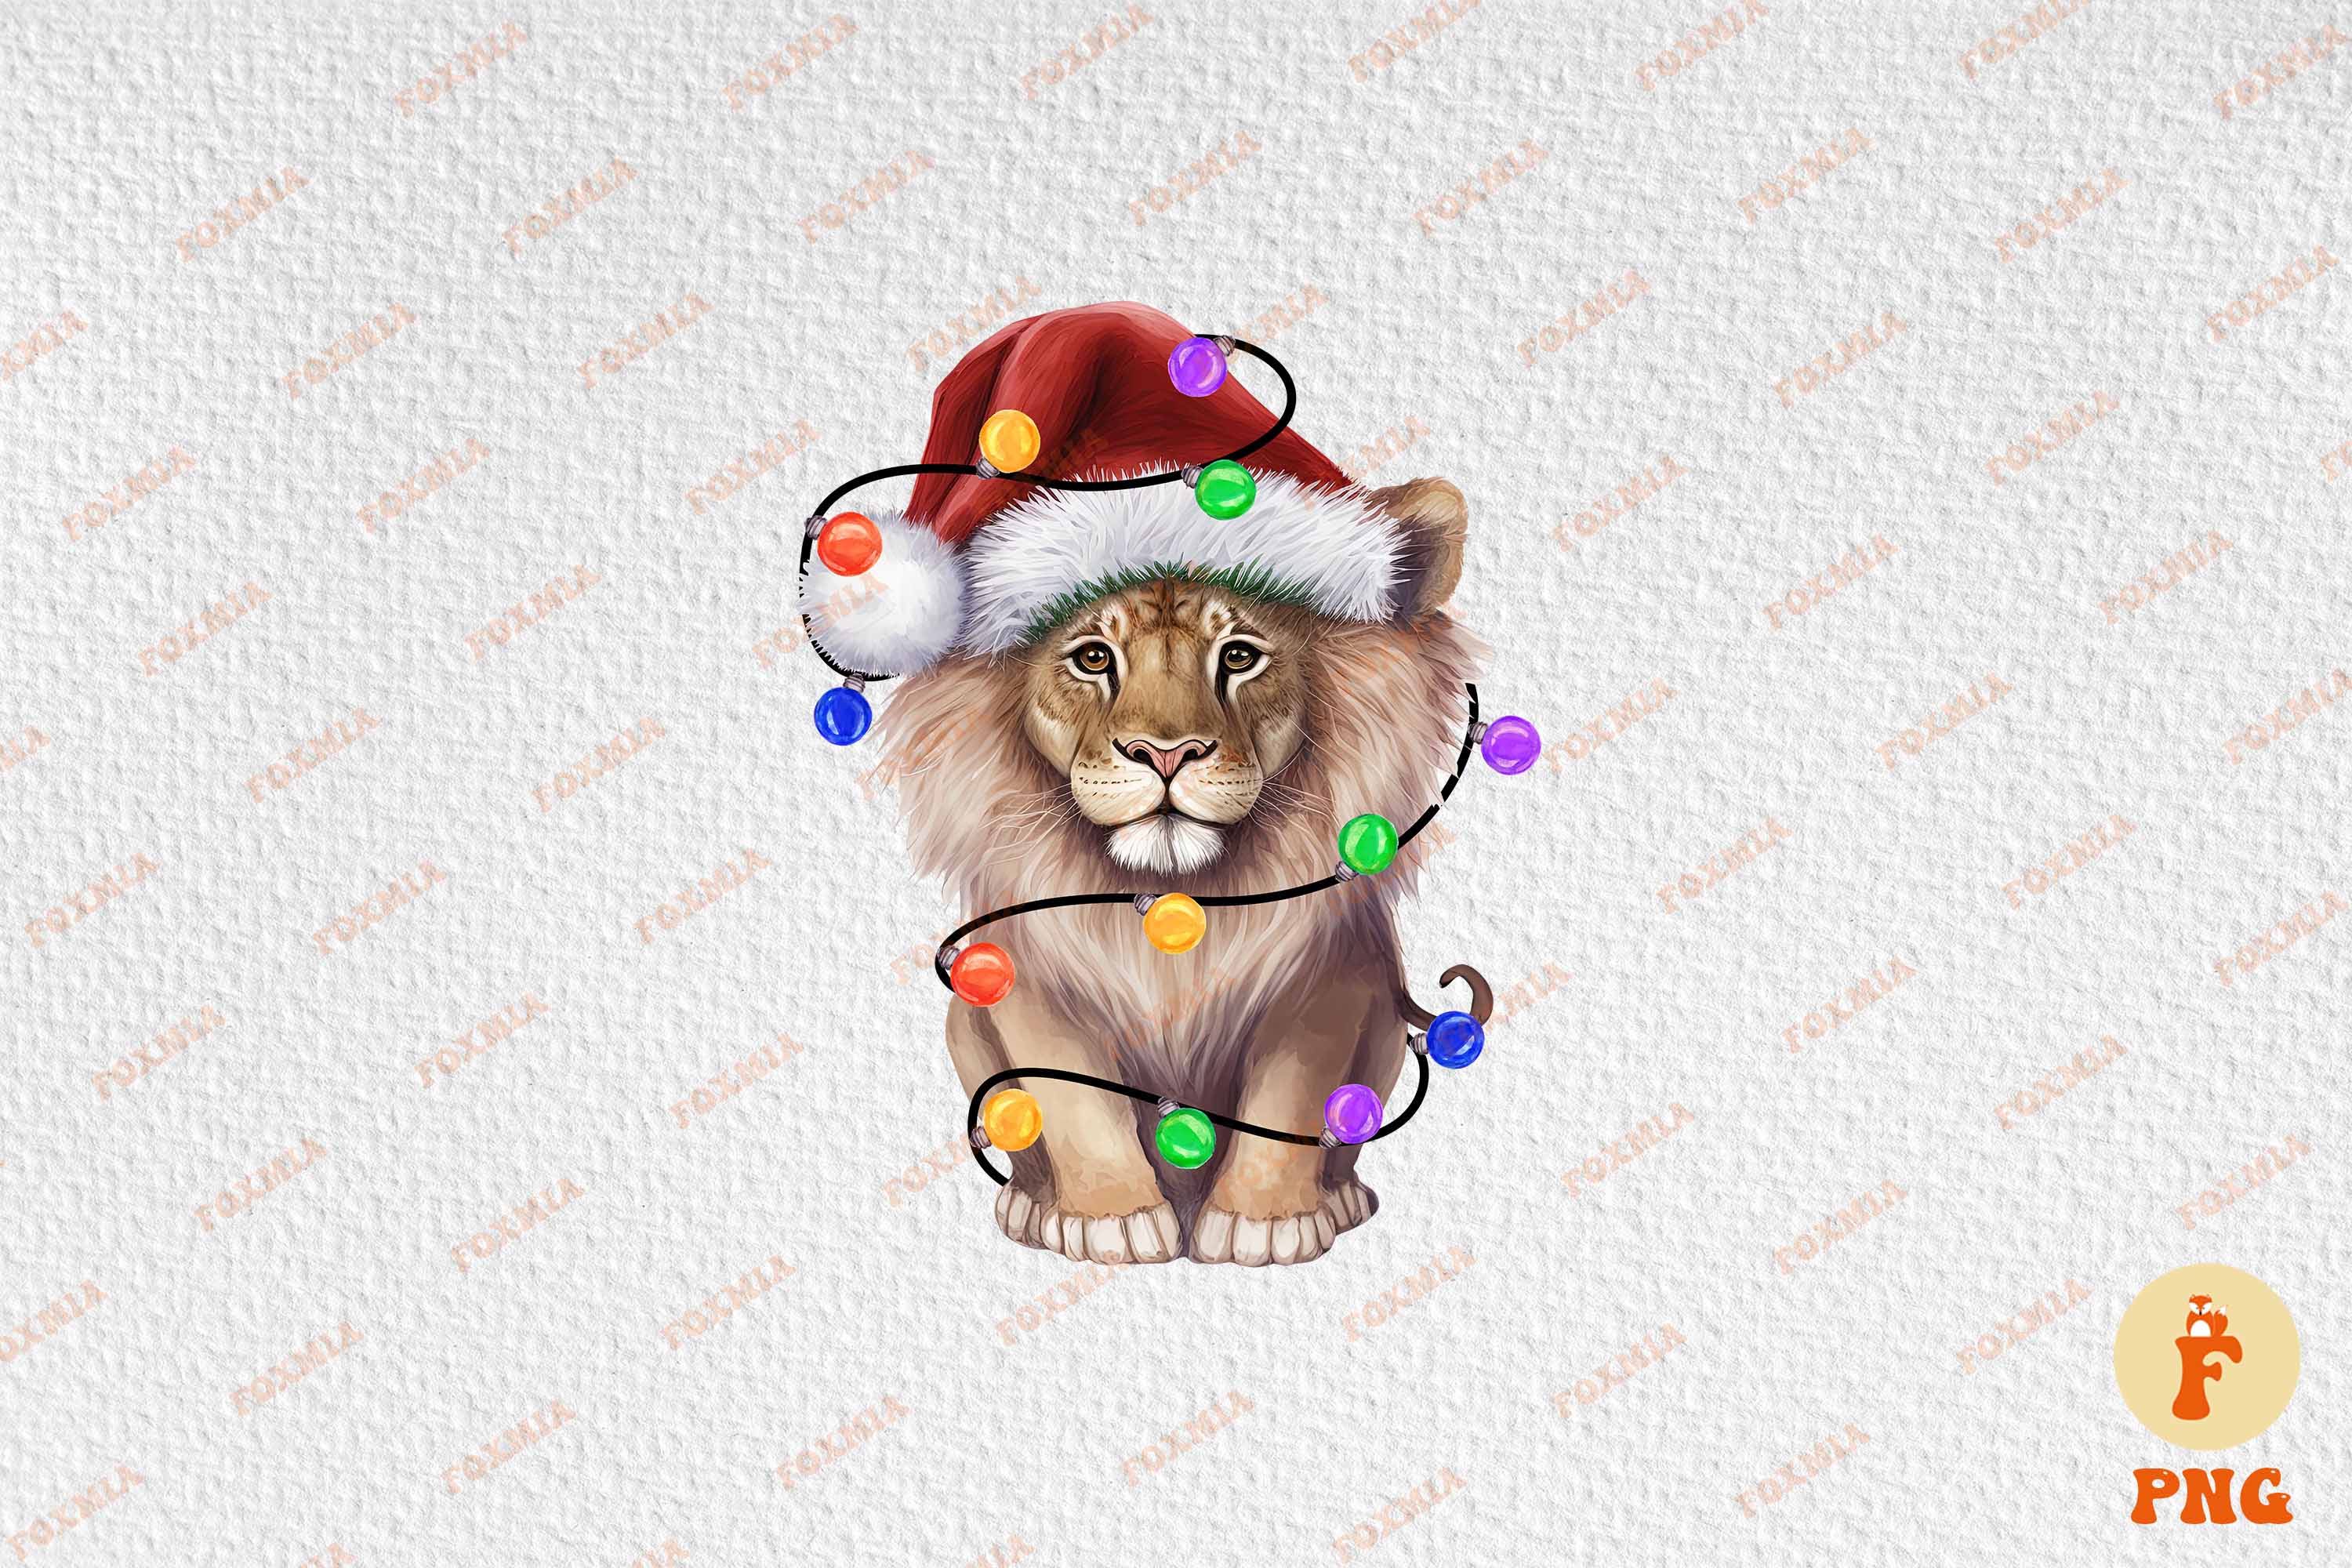 Irresistible image of a lion in a santa hat.